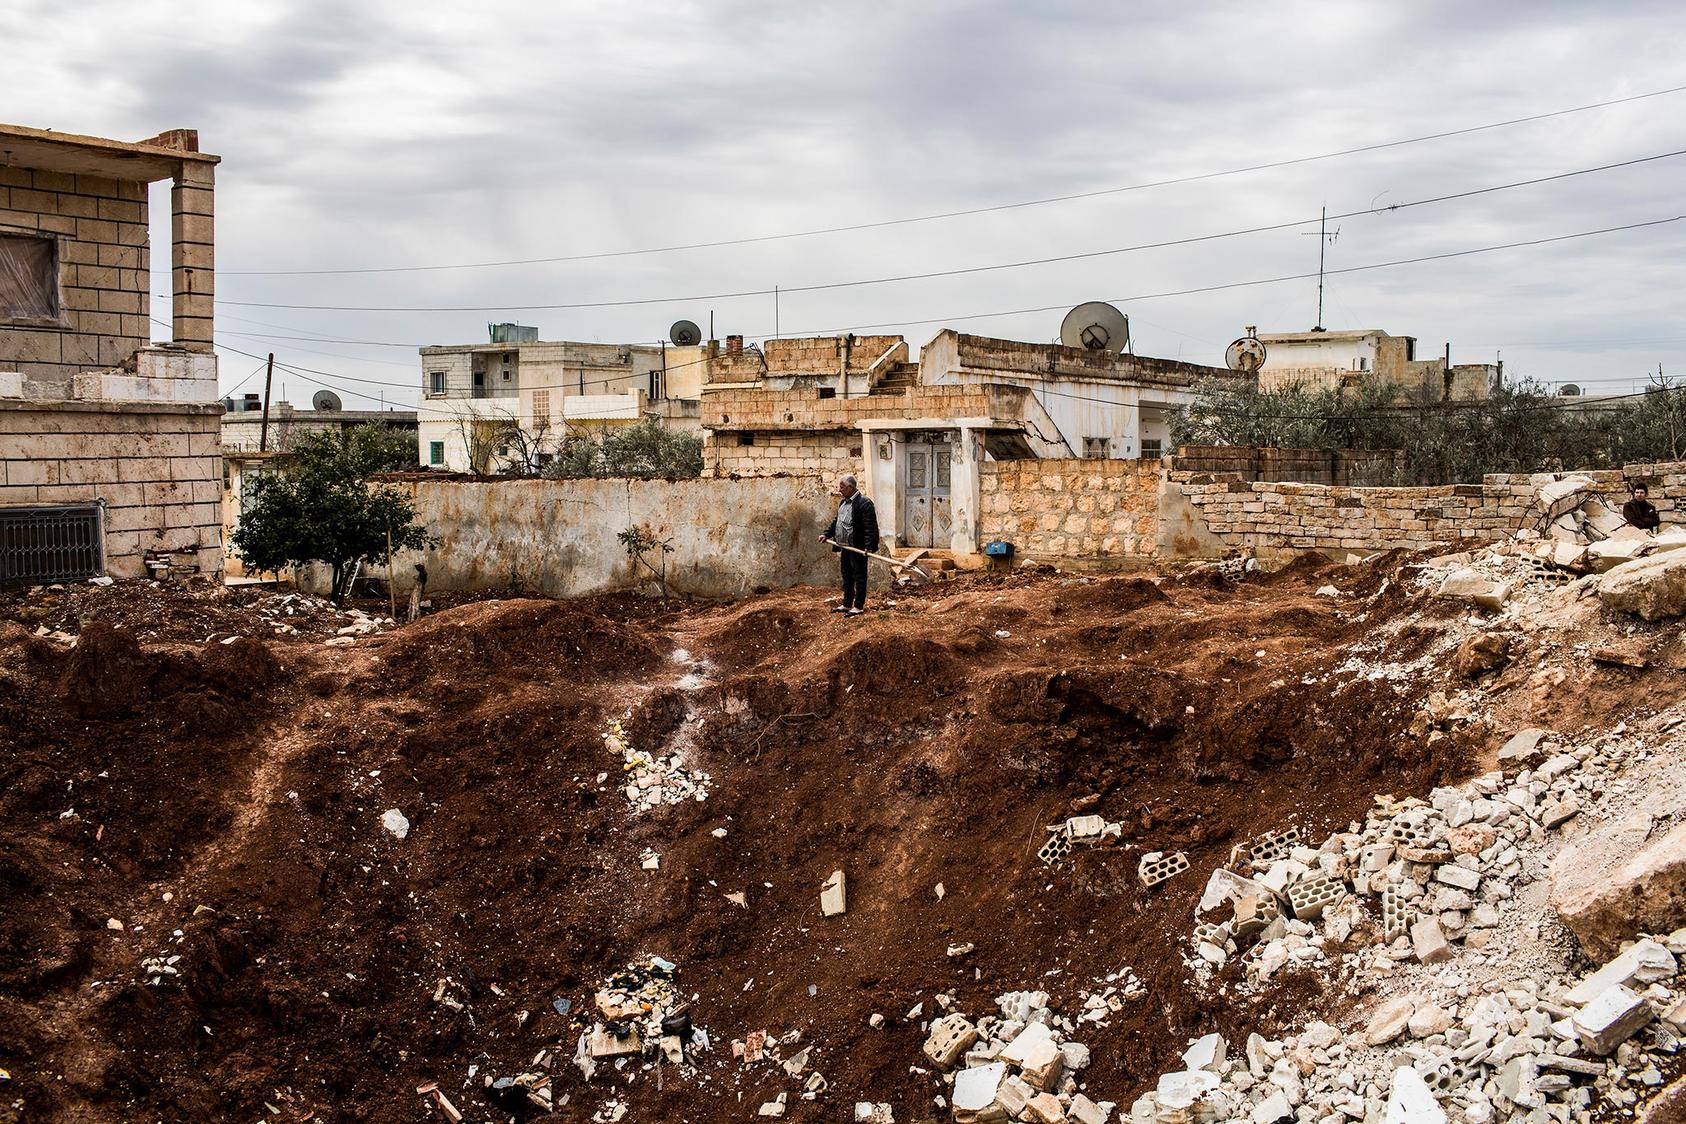  A man holding a shovel surveys a crater left by what locals said was a Scud missile strike 